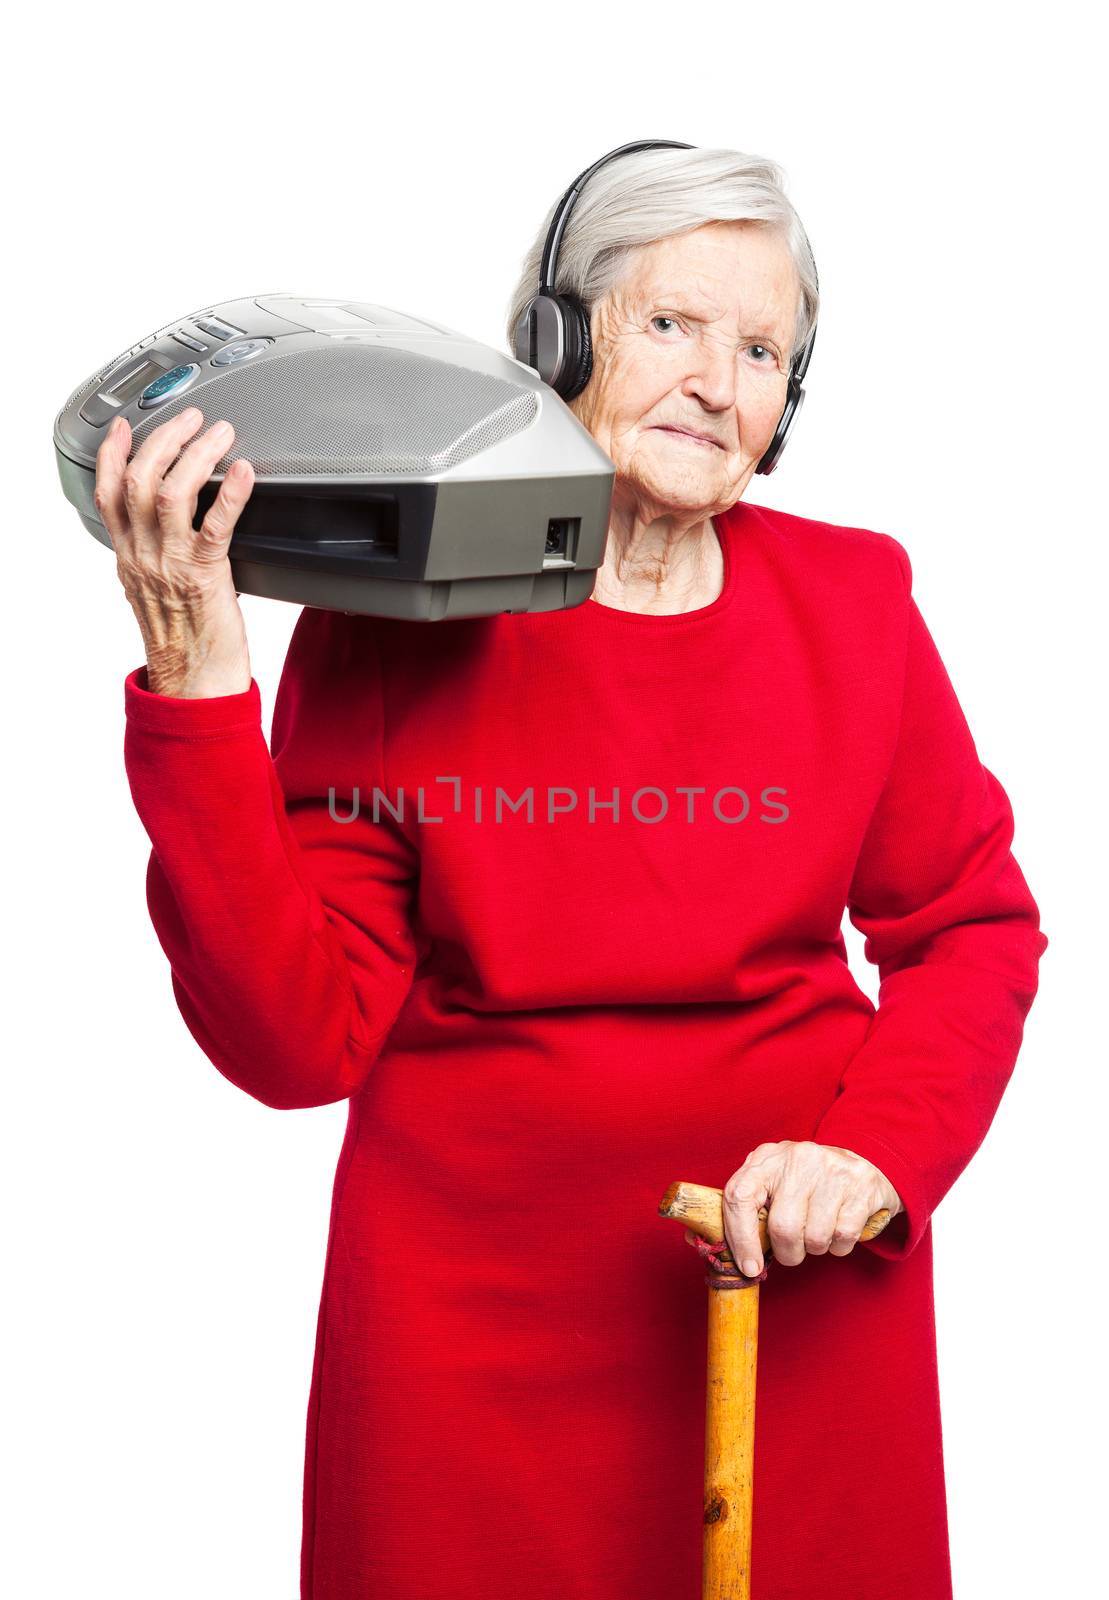 Senior woman listening to music on stereo recorder by photobac